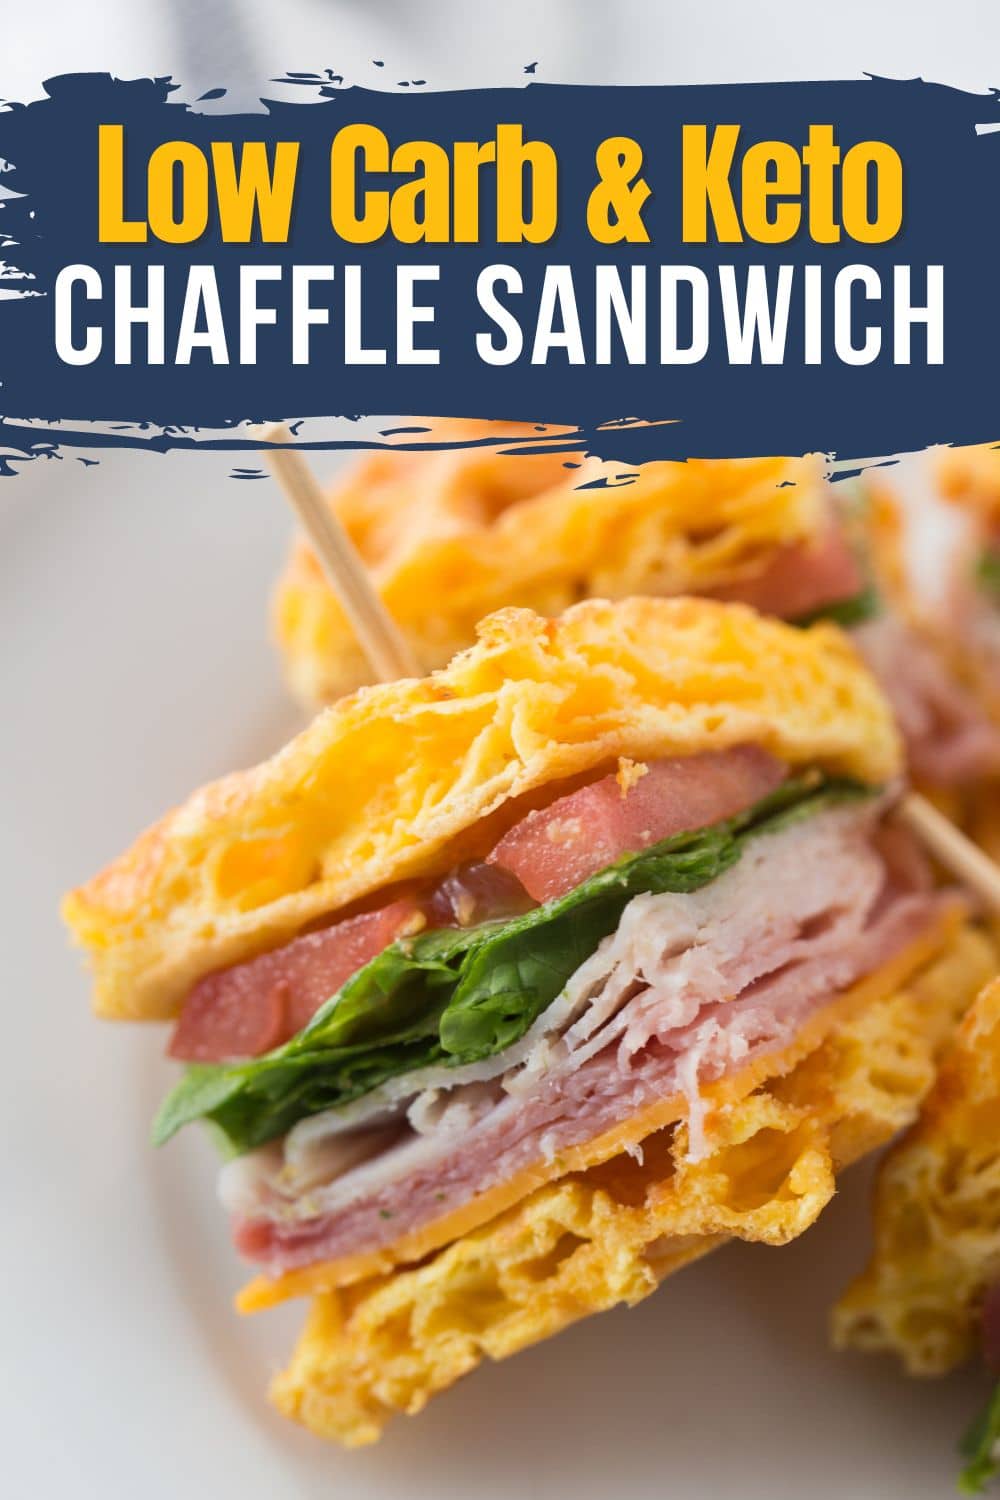 Chaffle club sandwich cut diagonally with lettuce, tomato, chicken, bacon, and cheese filling